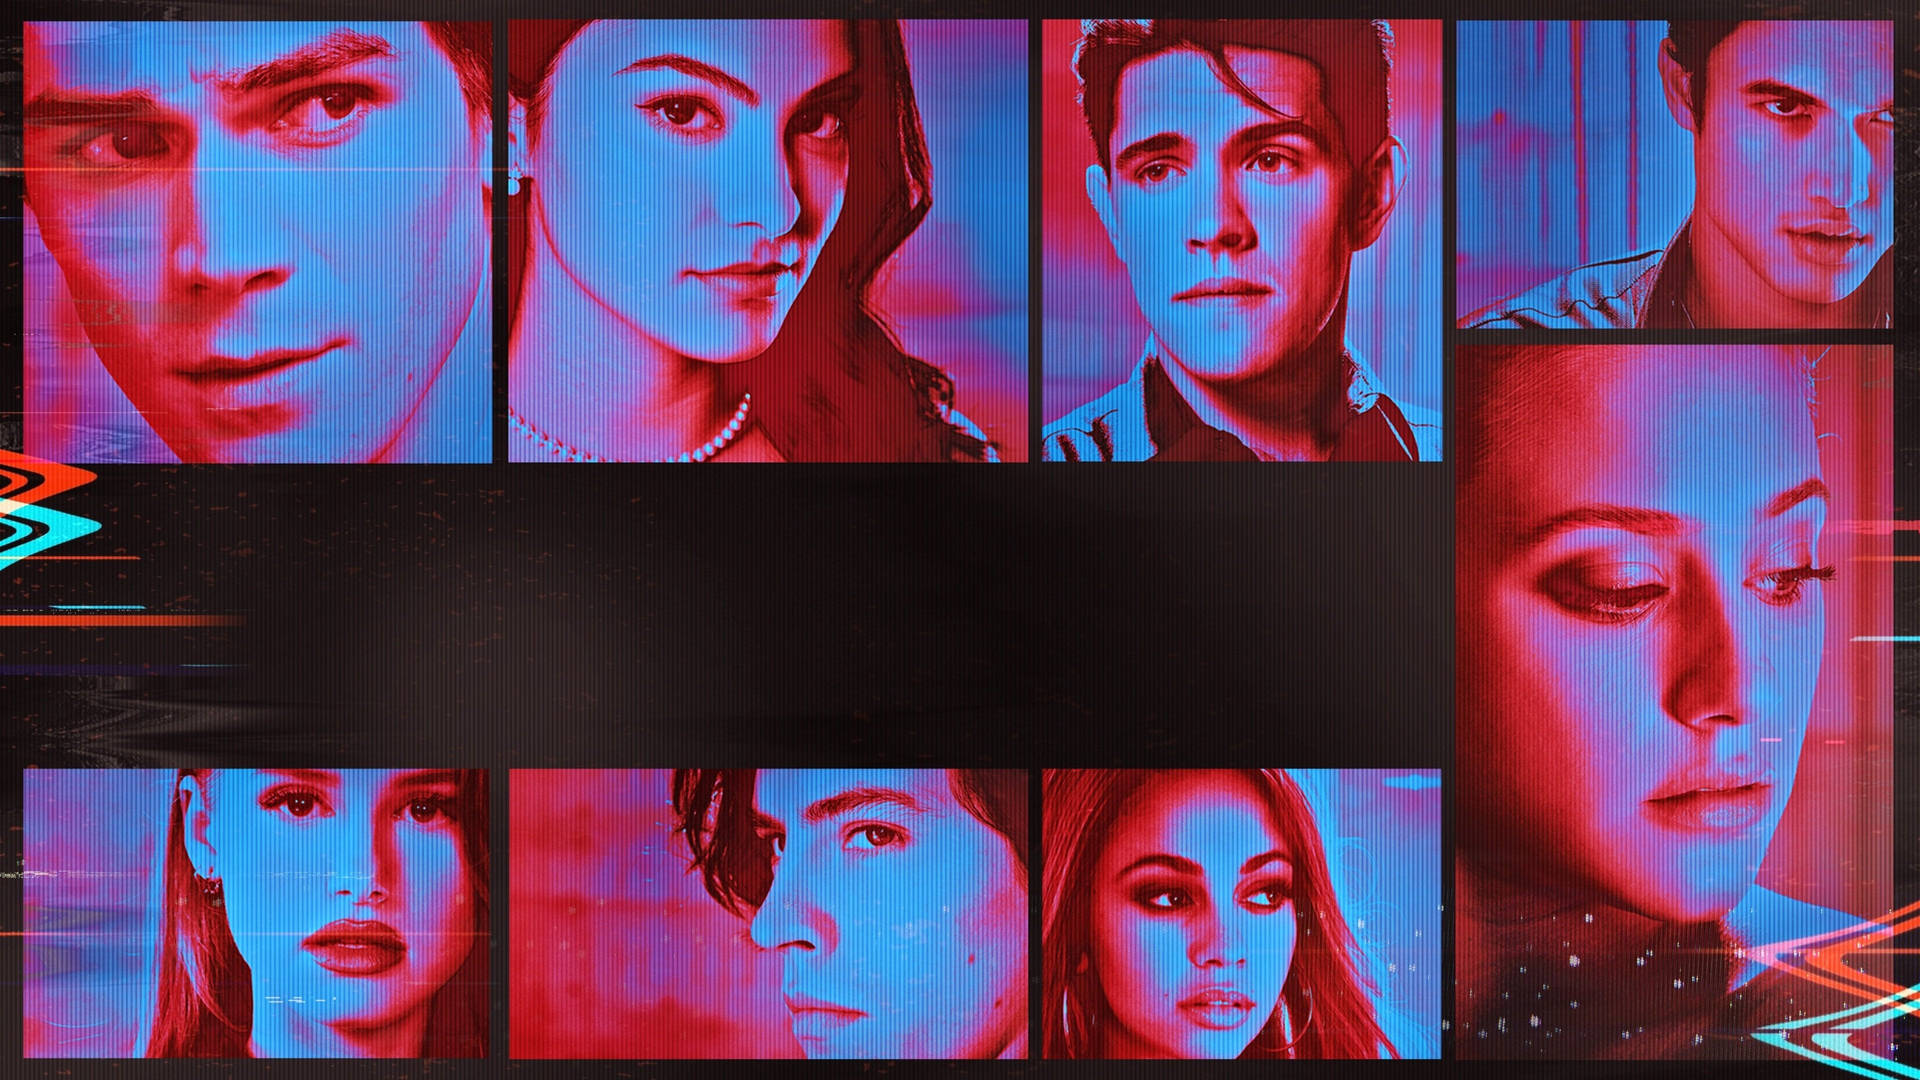 Riverdale Anaglyph 3D Collage Wallpaper